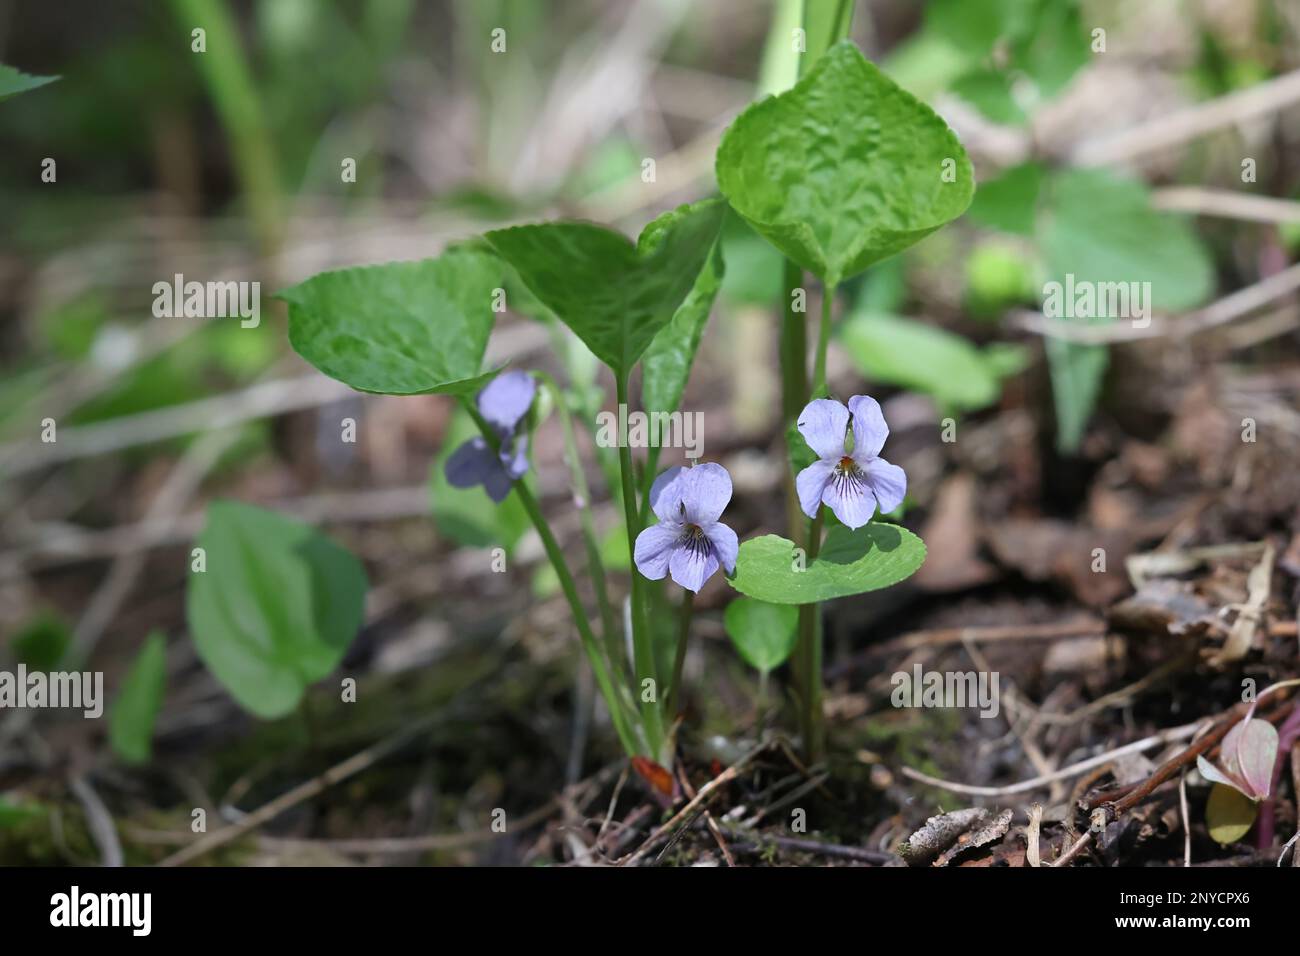 Viola mirabilis, commonly known as Wonder Violet, wild spring flower from Finland Stock Photo